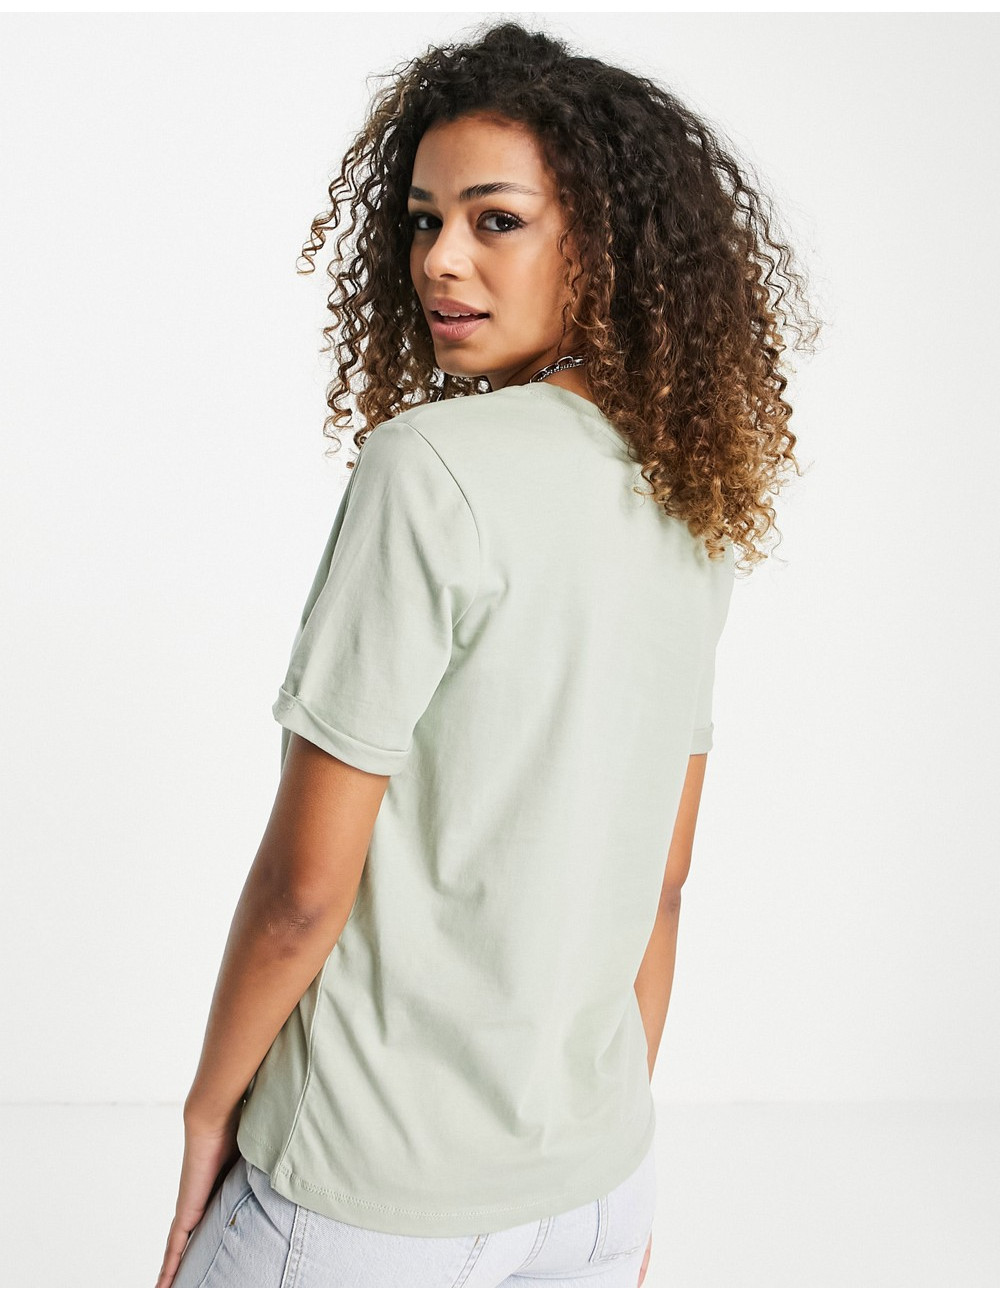 Pieces cotton t-shirt in green